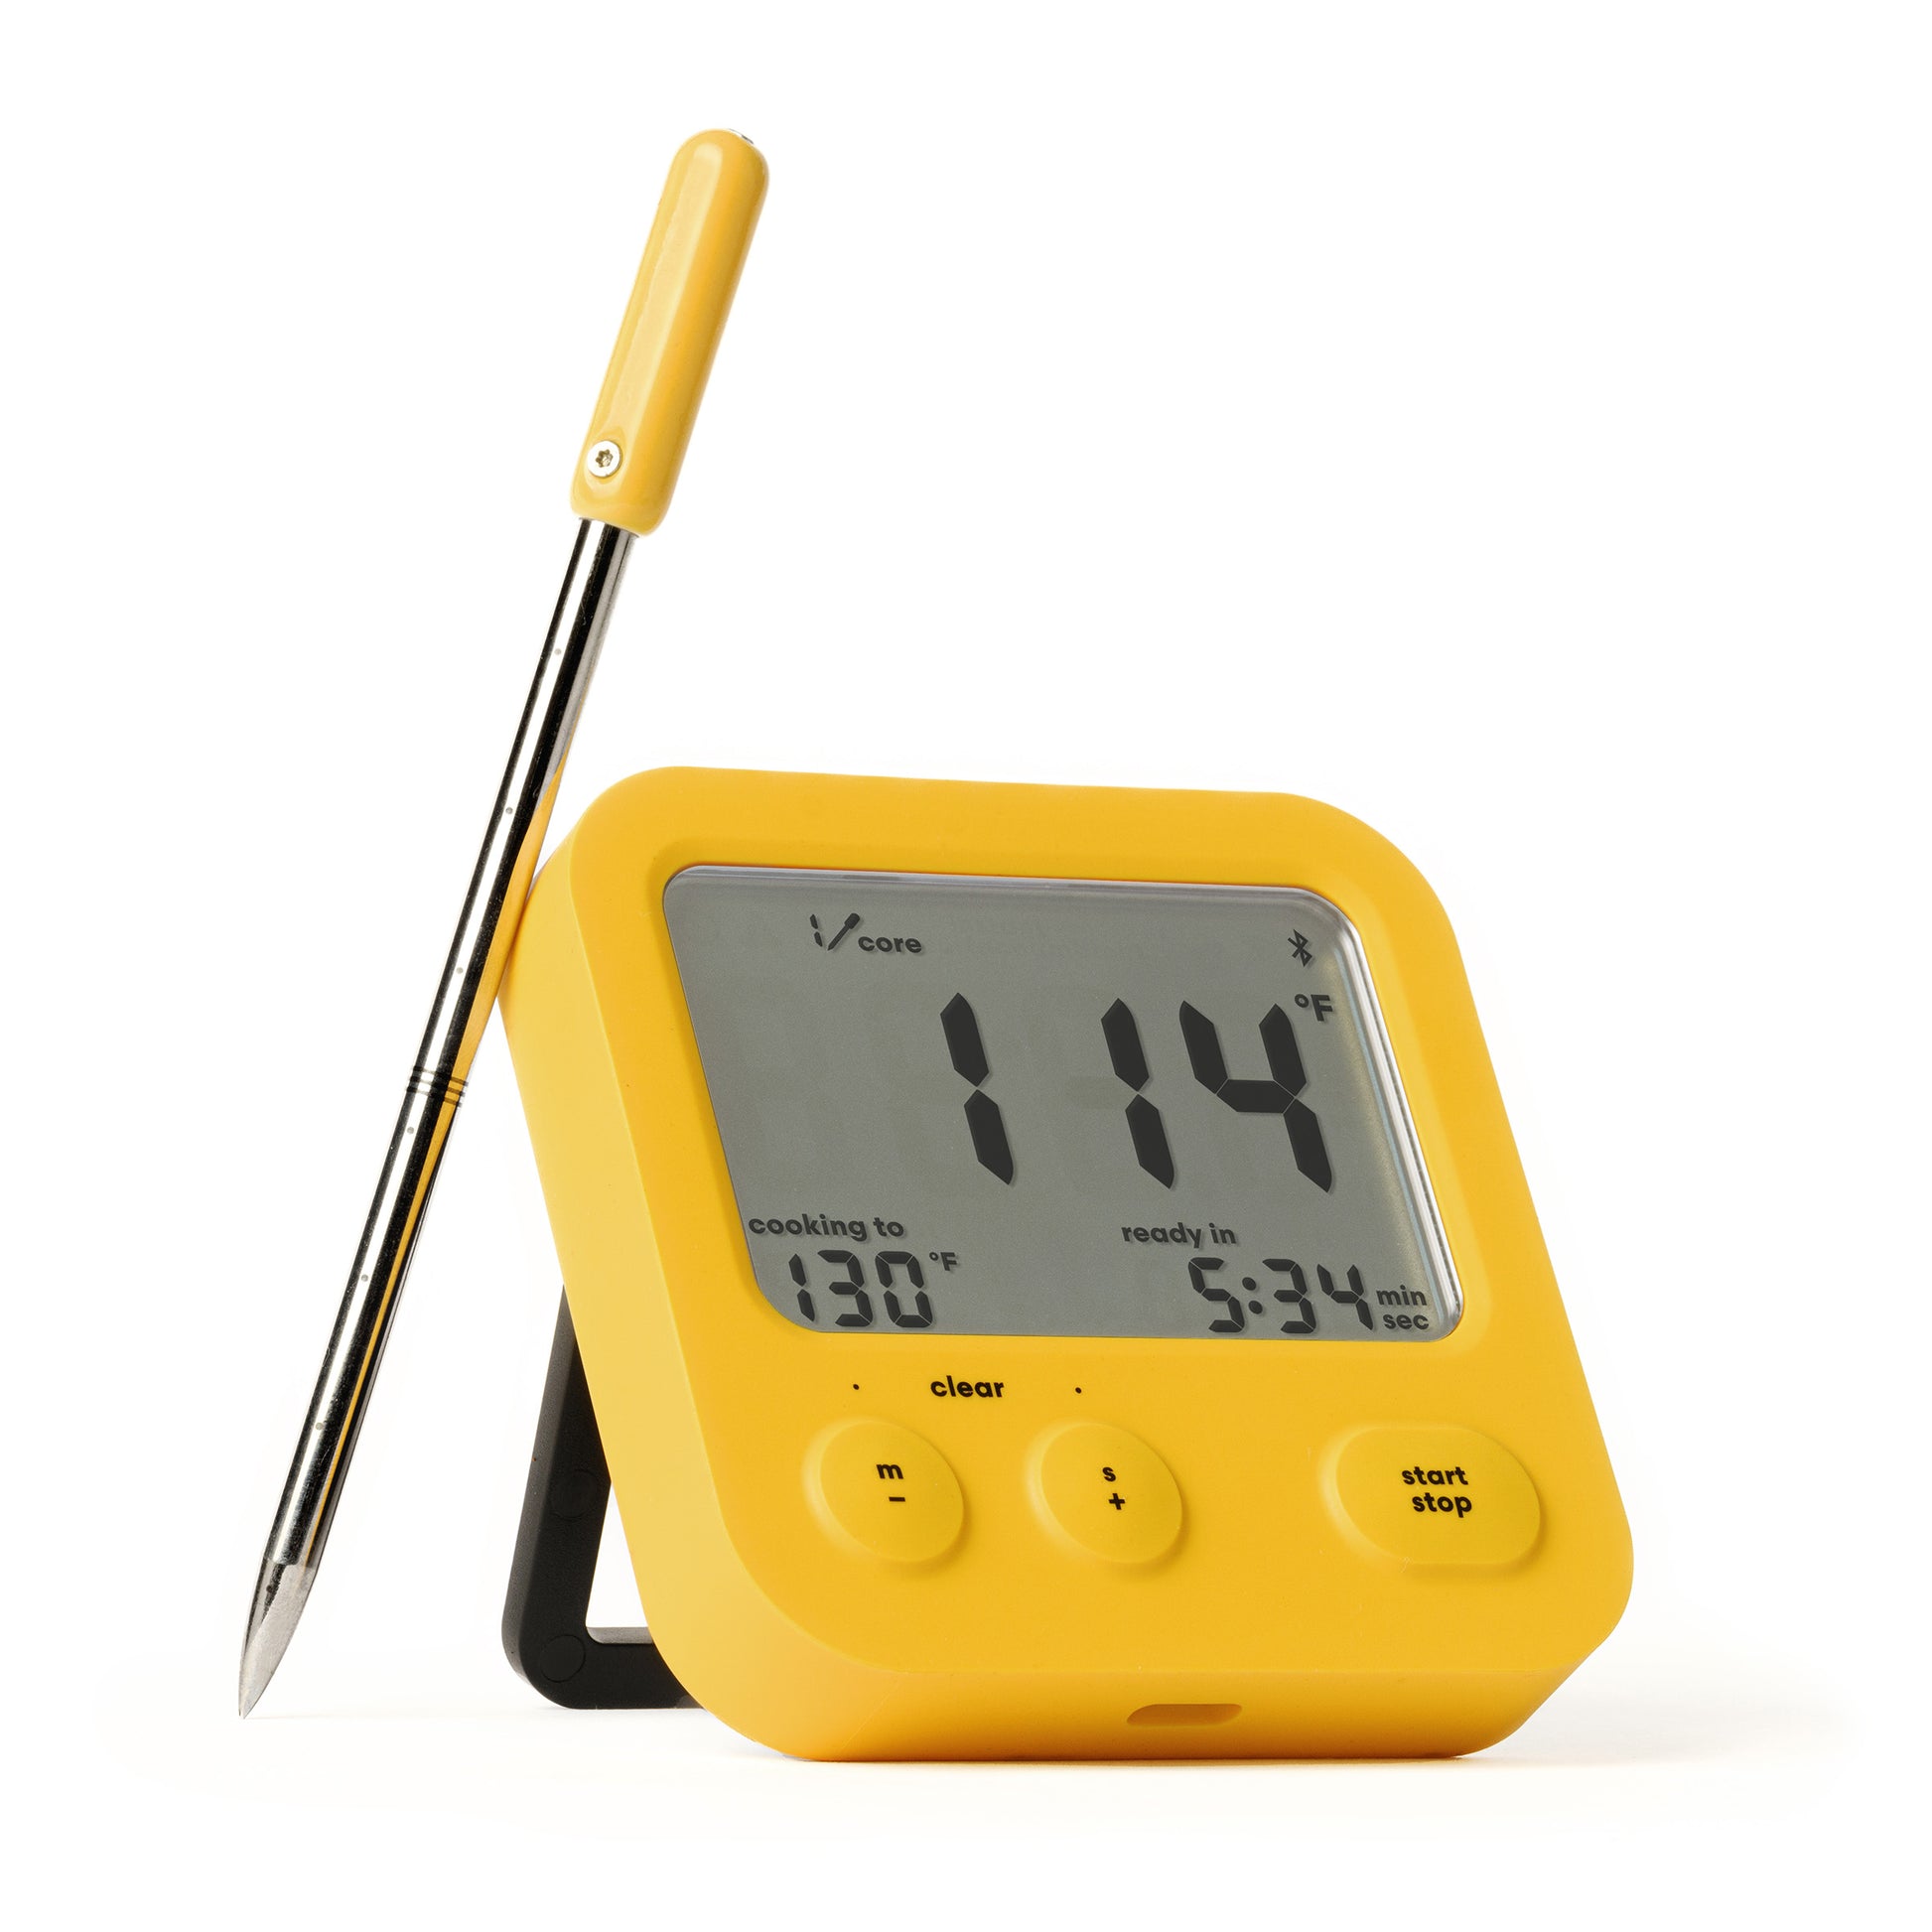 If You *Still* Don't Own A Meat Thermometer, Here are 3 We'd